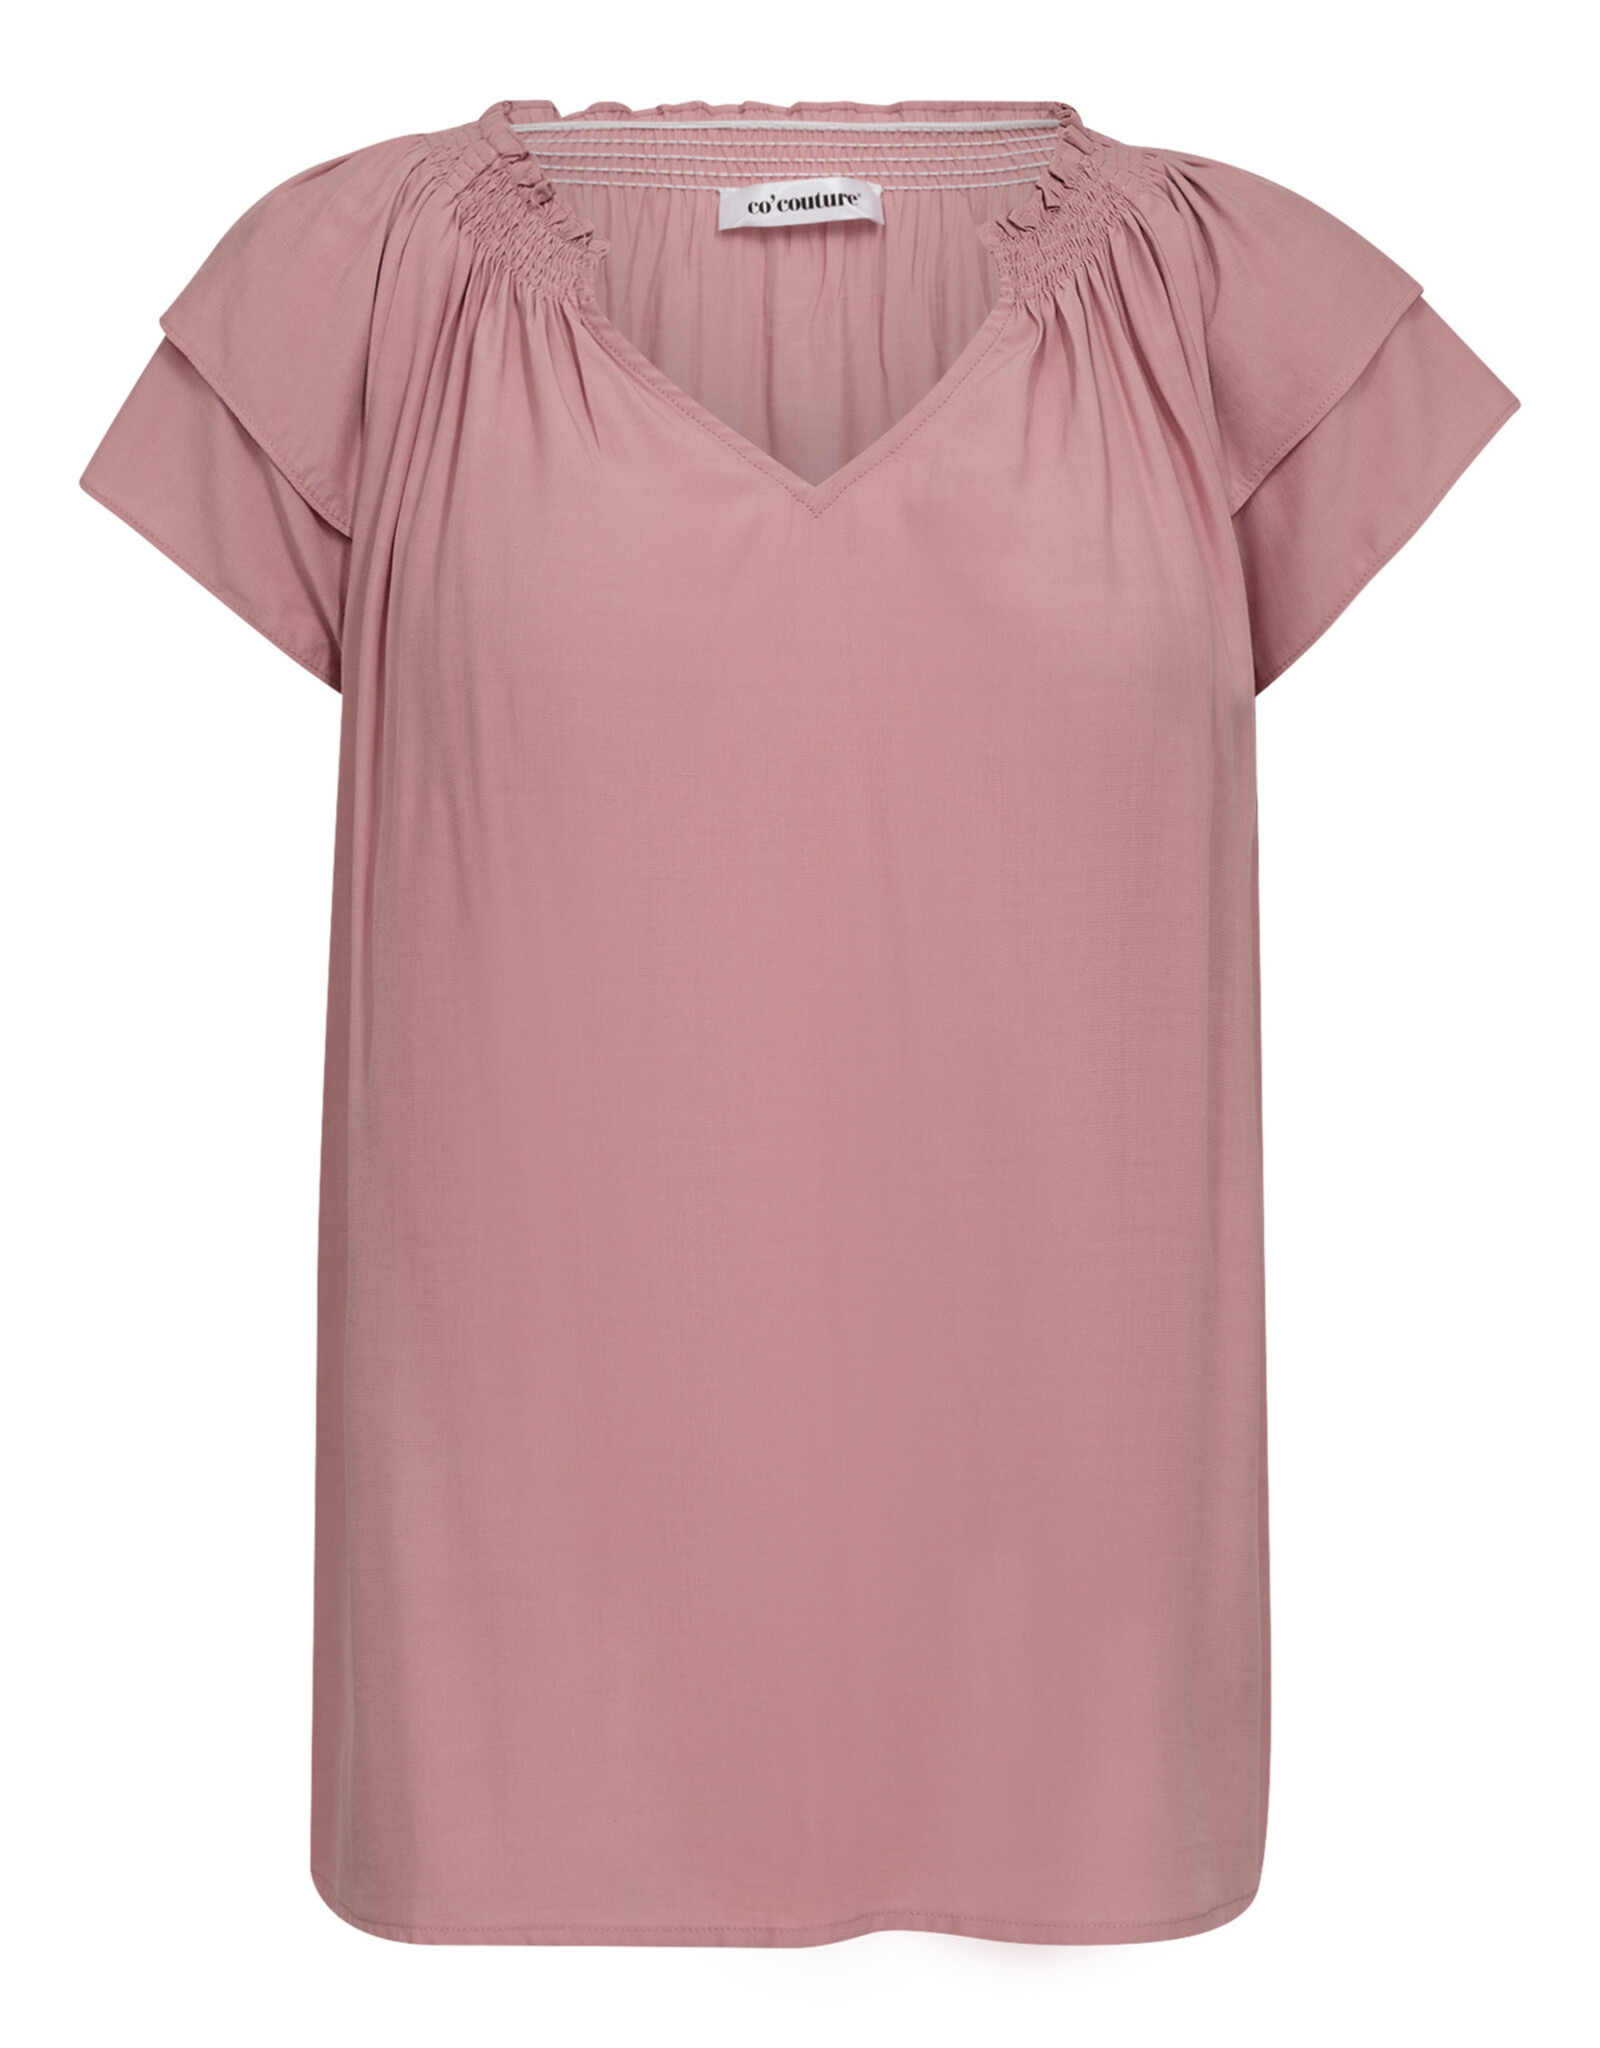 Co'Couture Sunrise Top Rose